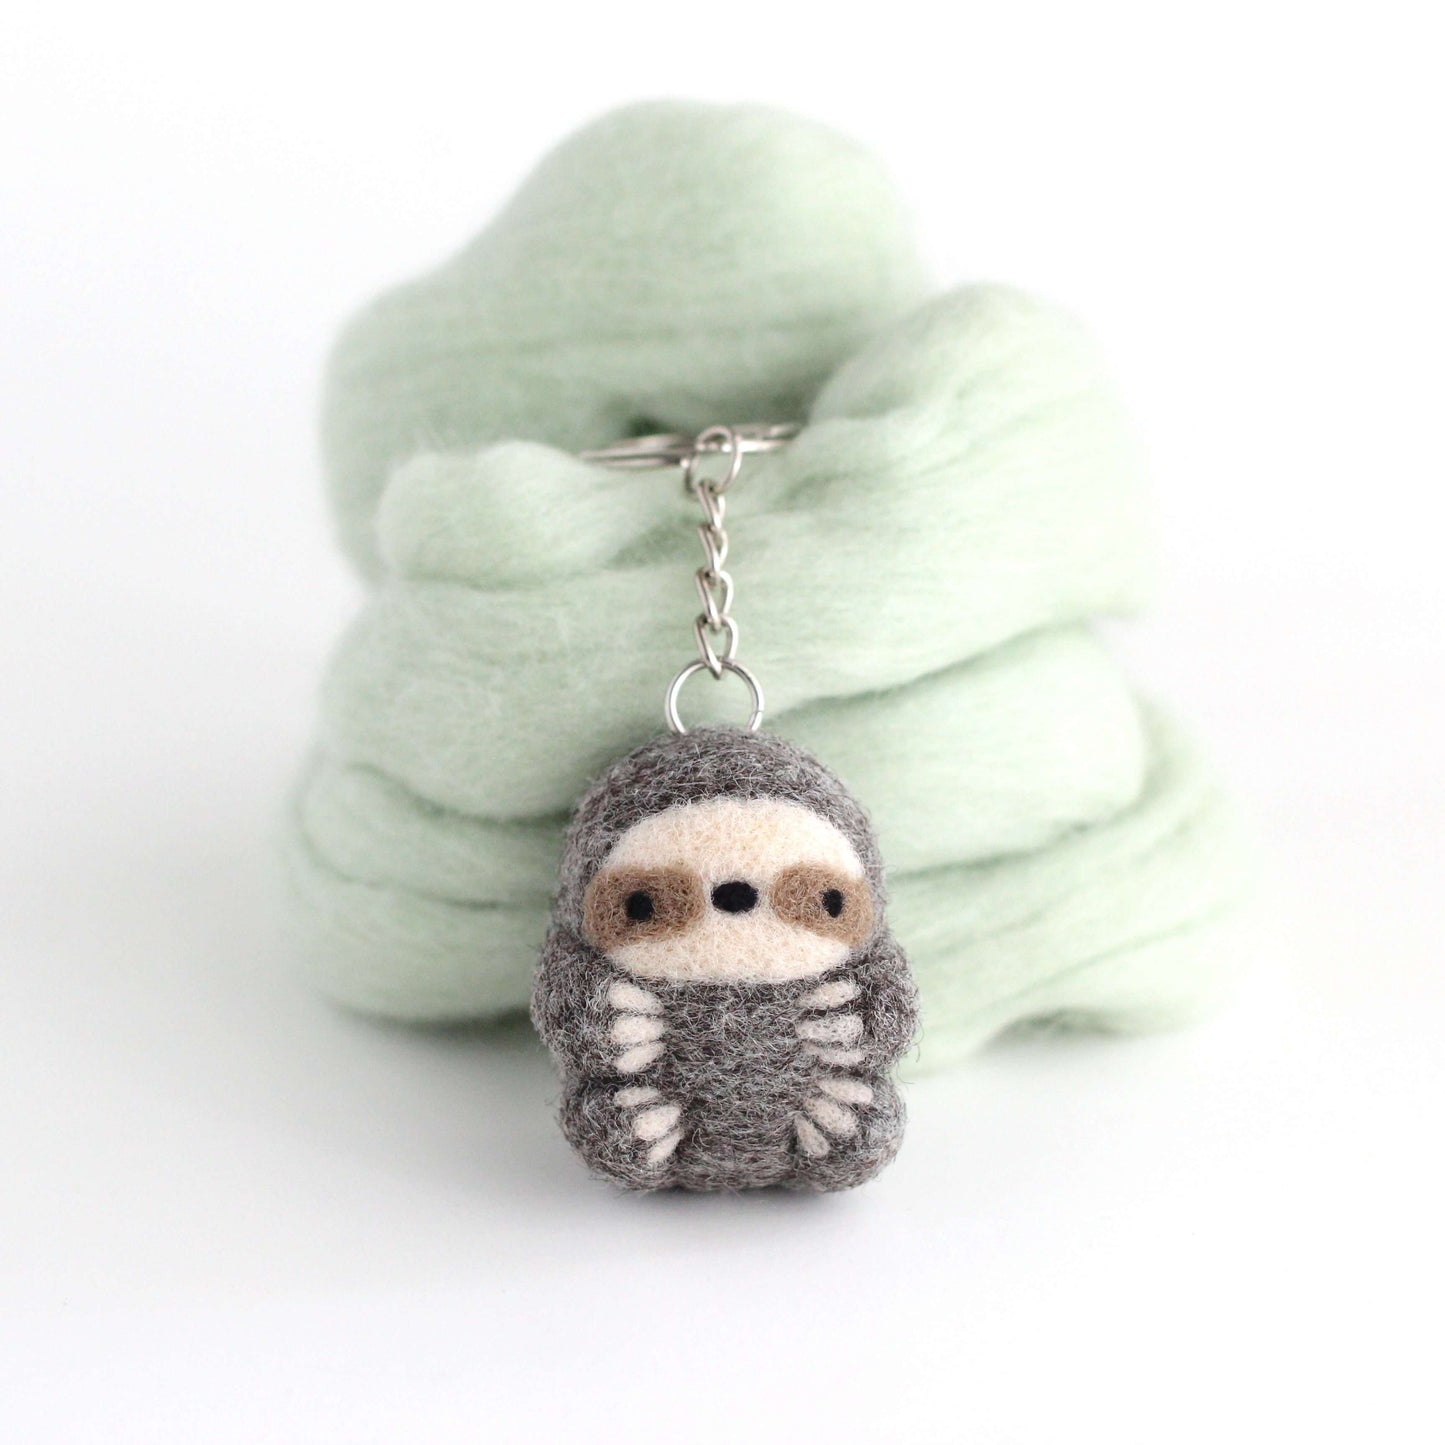 Needle Felted Sloth Keychain by Wild Whimsy Woolies